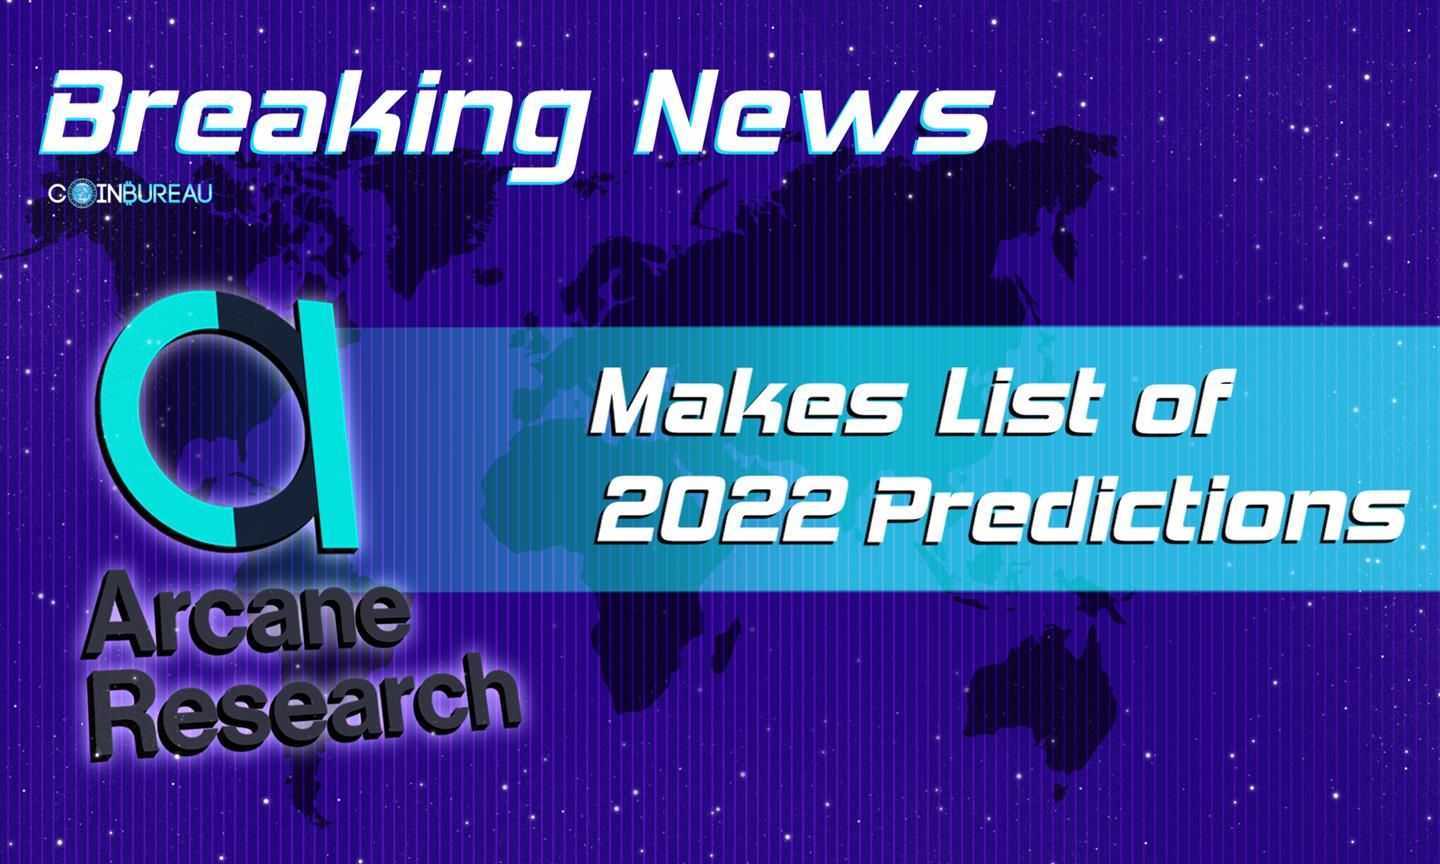 Insights Firm Arcane Research Makes List of 2022 Predictions